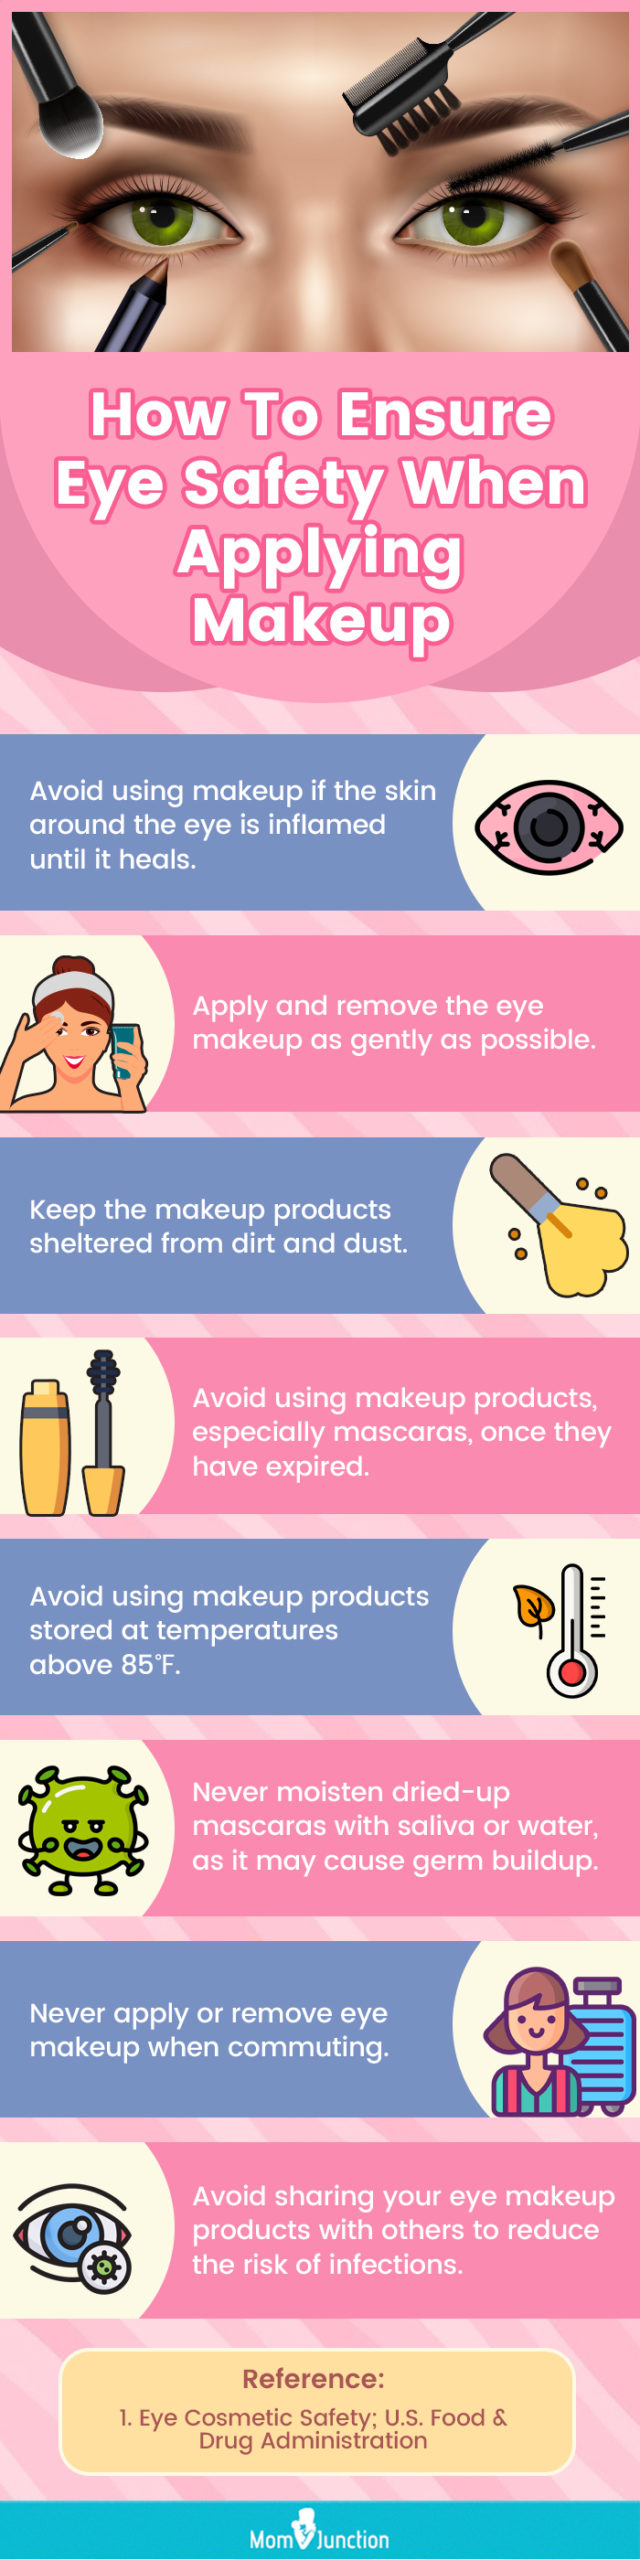 How To Ensure Eye Safety When Applying Makeup